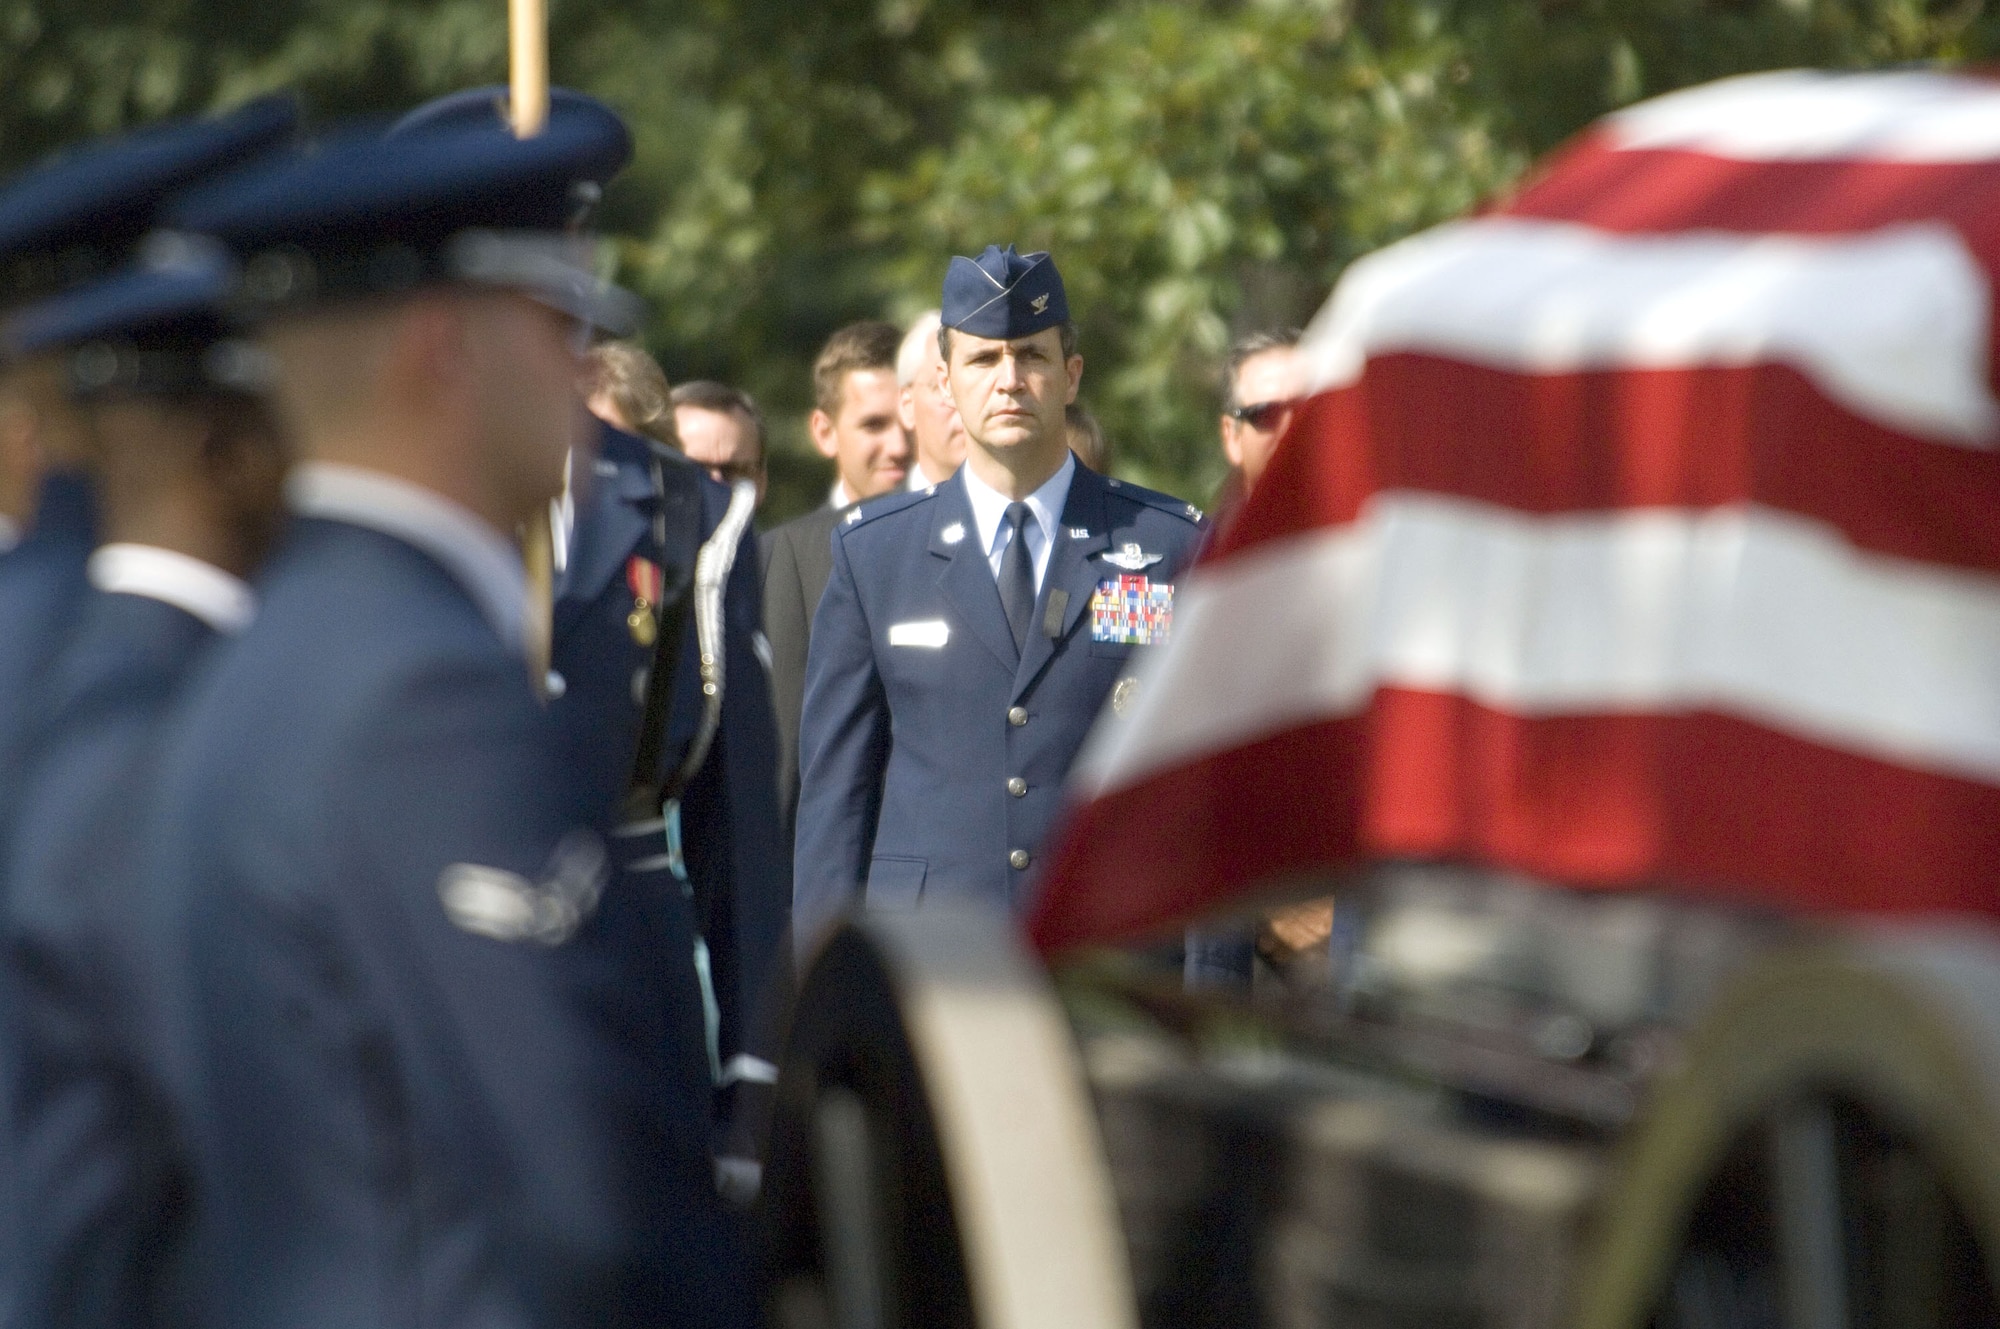 Col. John D. Posner walks behind the casket of his father, retired Maj. Gen. Jack I. Posner, at Arlington National Cemetery on Aug. 11. General Posner was among the last bomber pilots to have served in World War II. (U.S. Air Force photo/Tech. Sgt. Cohen A. Young) 
